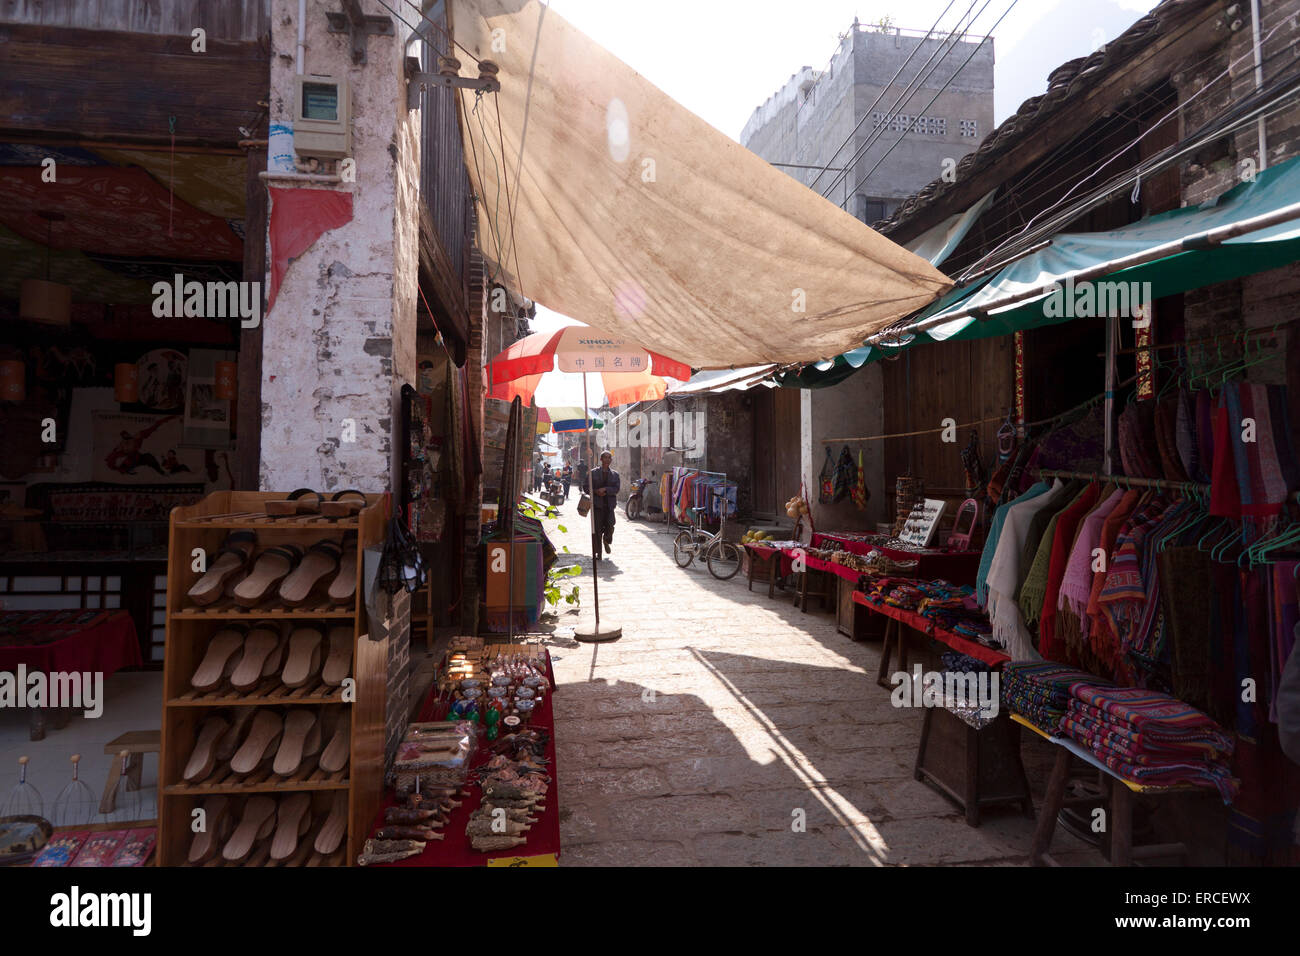 Narrow street with stalls in China Stock Photo